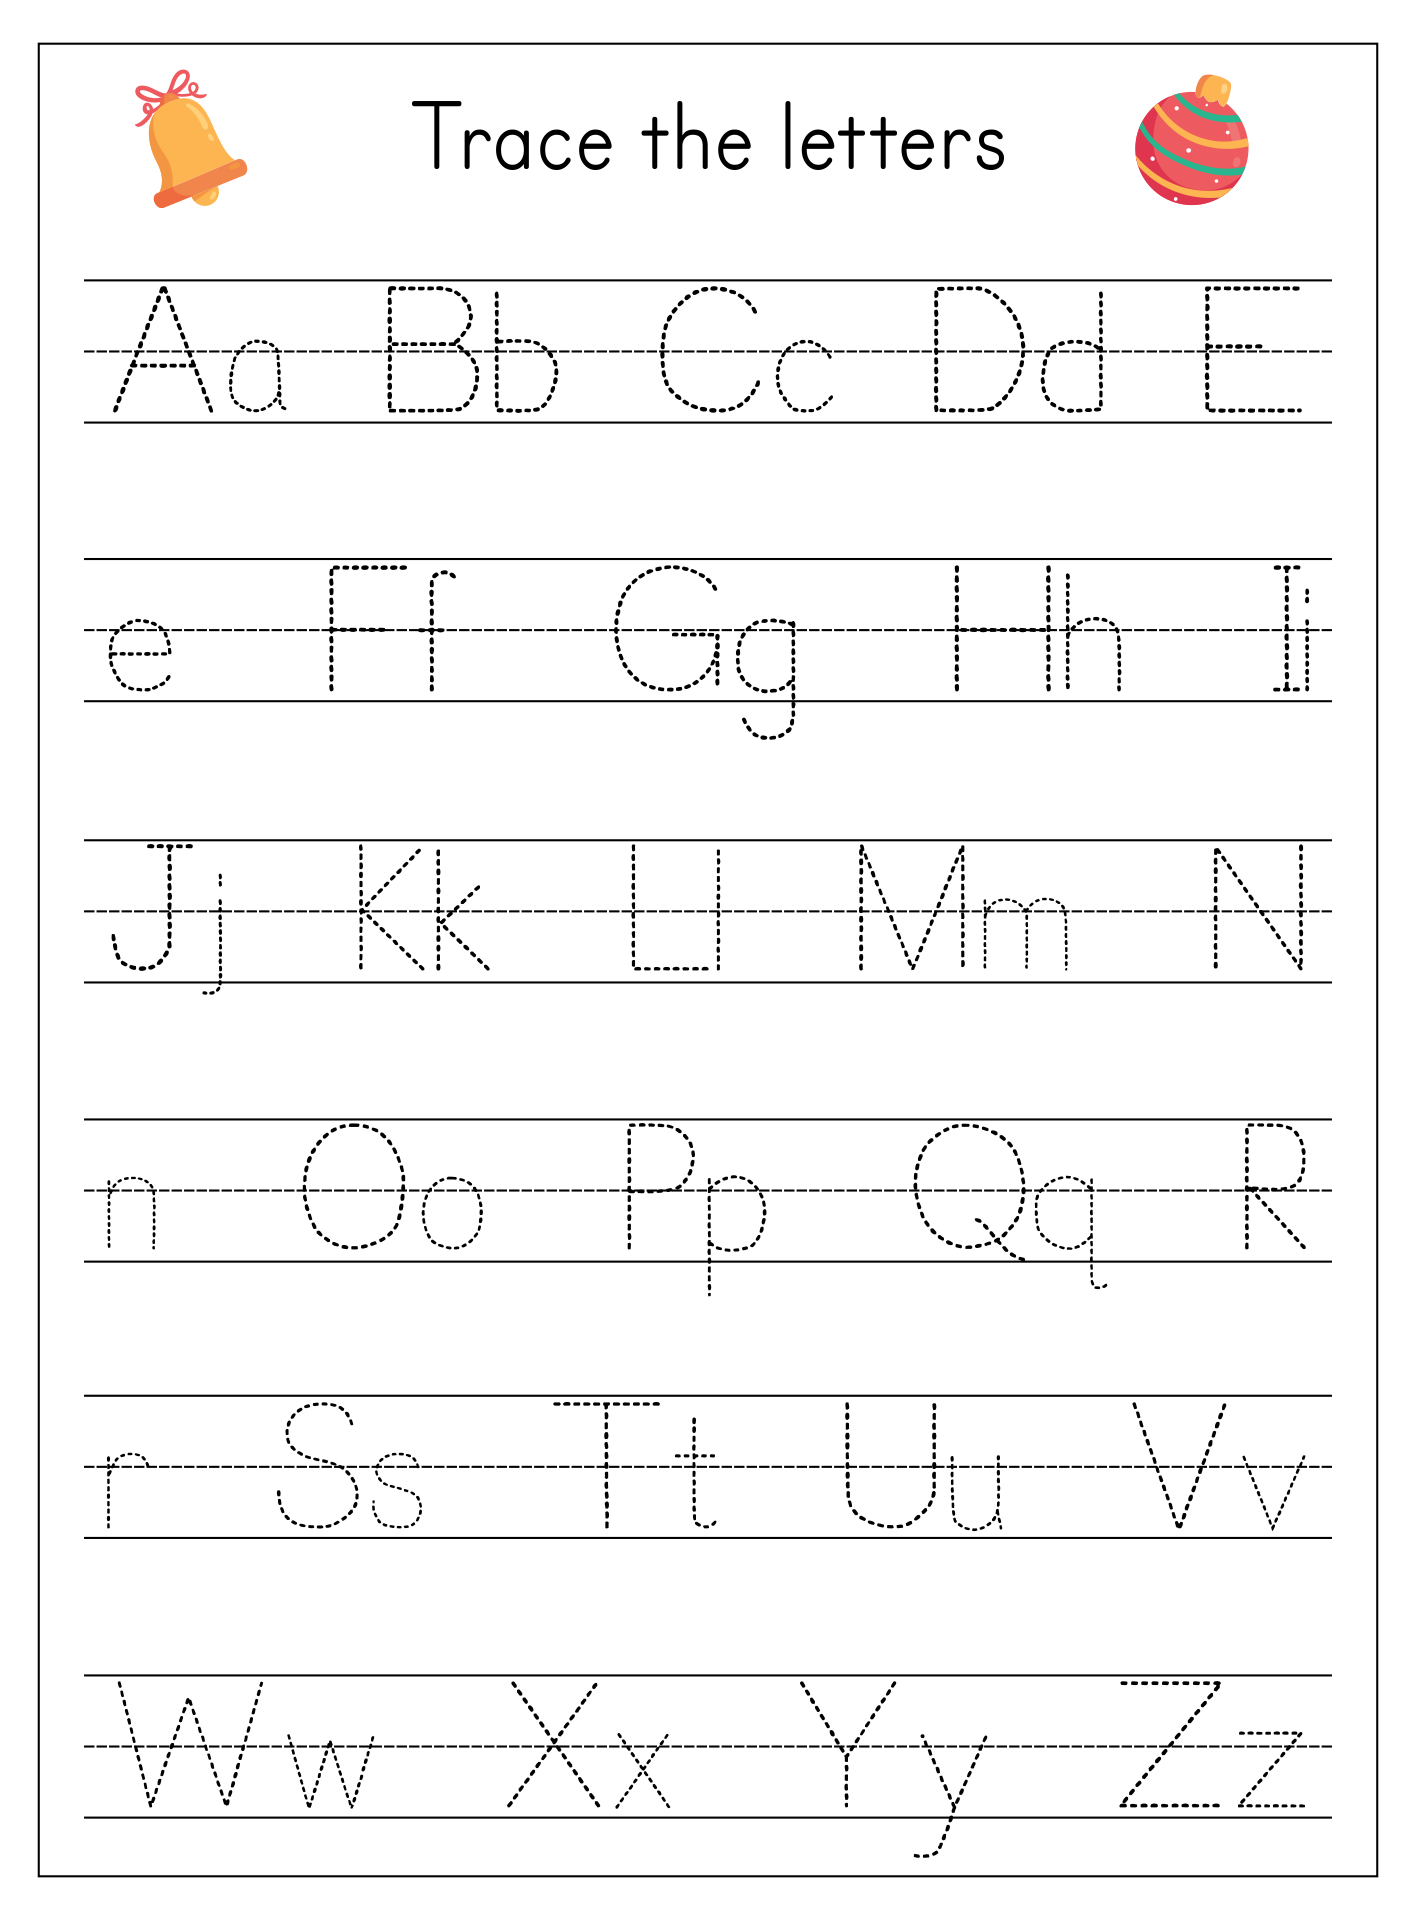 preschool-dotted-letters-for-tracing-tracinglettersworksheetscom